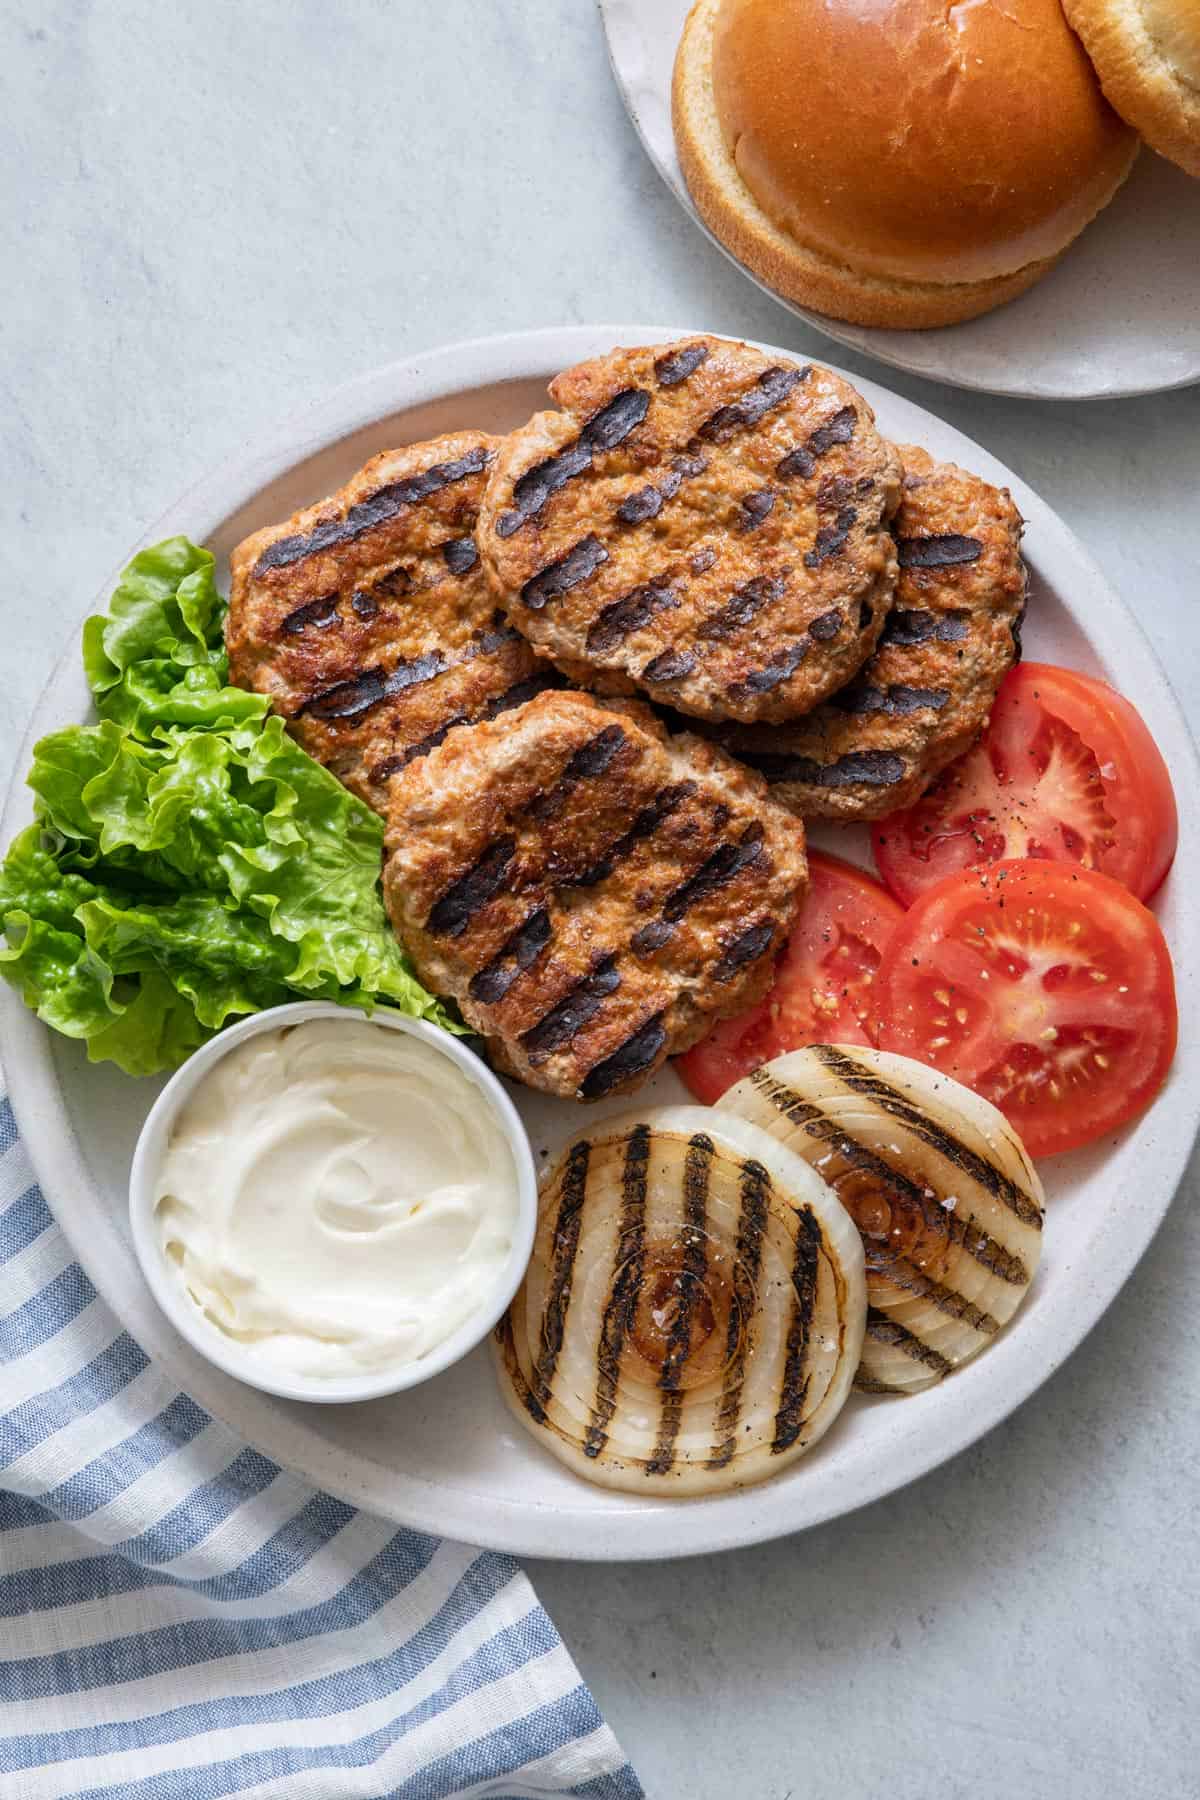 Grilled turkey burgers on plate with lettuce, tomato, grilled onions, and a small bowl of mayo with buns off to side.